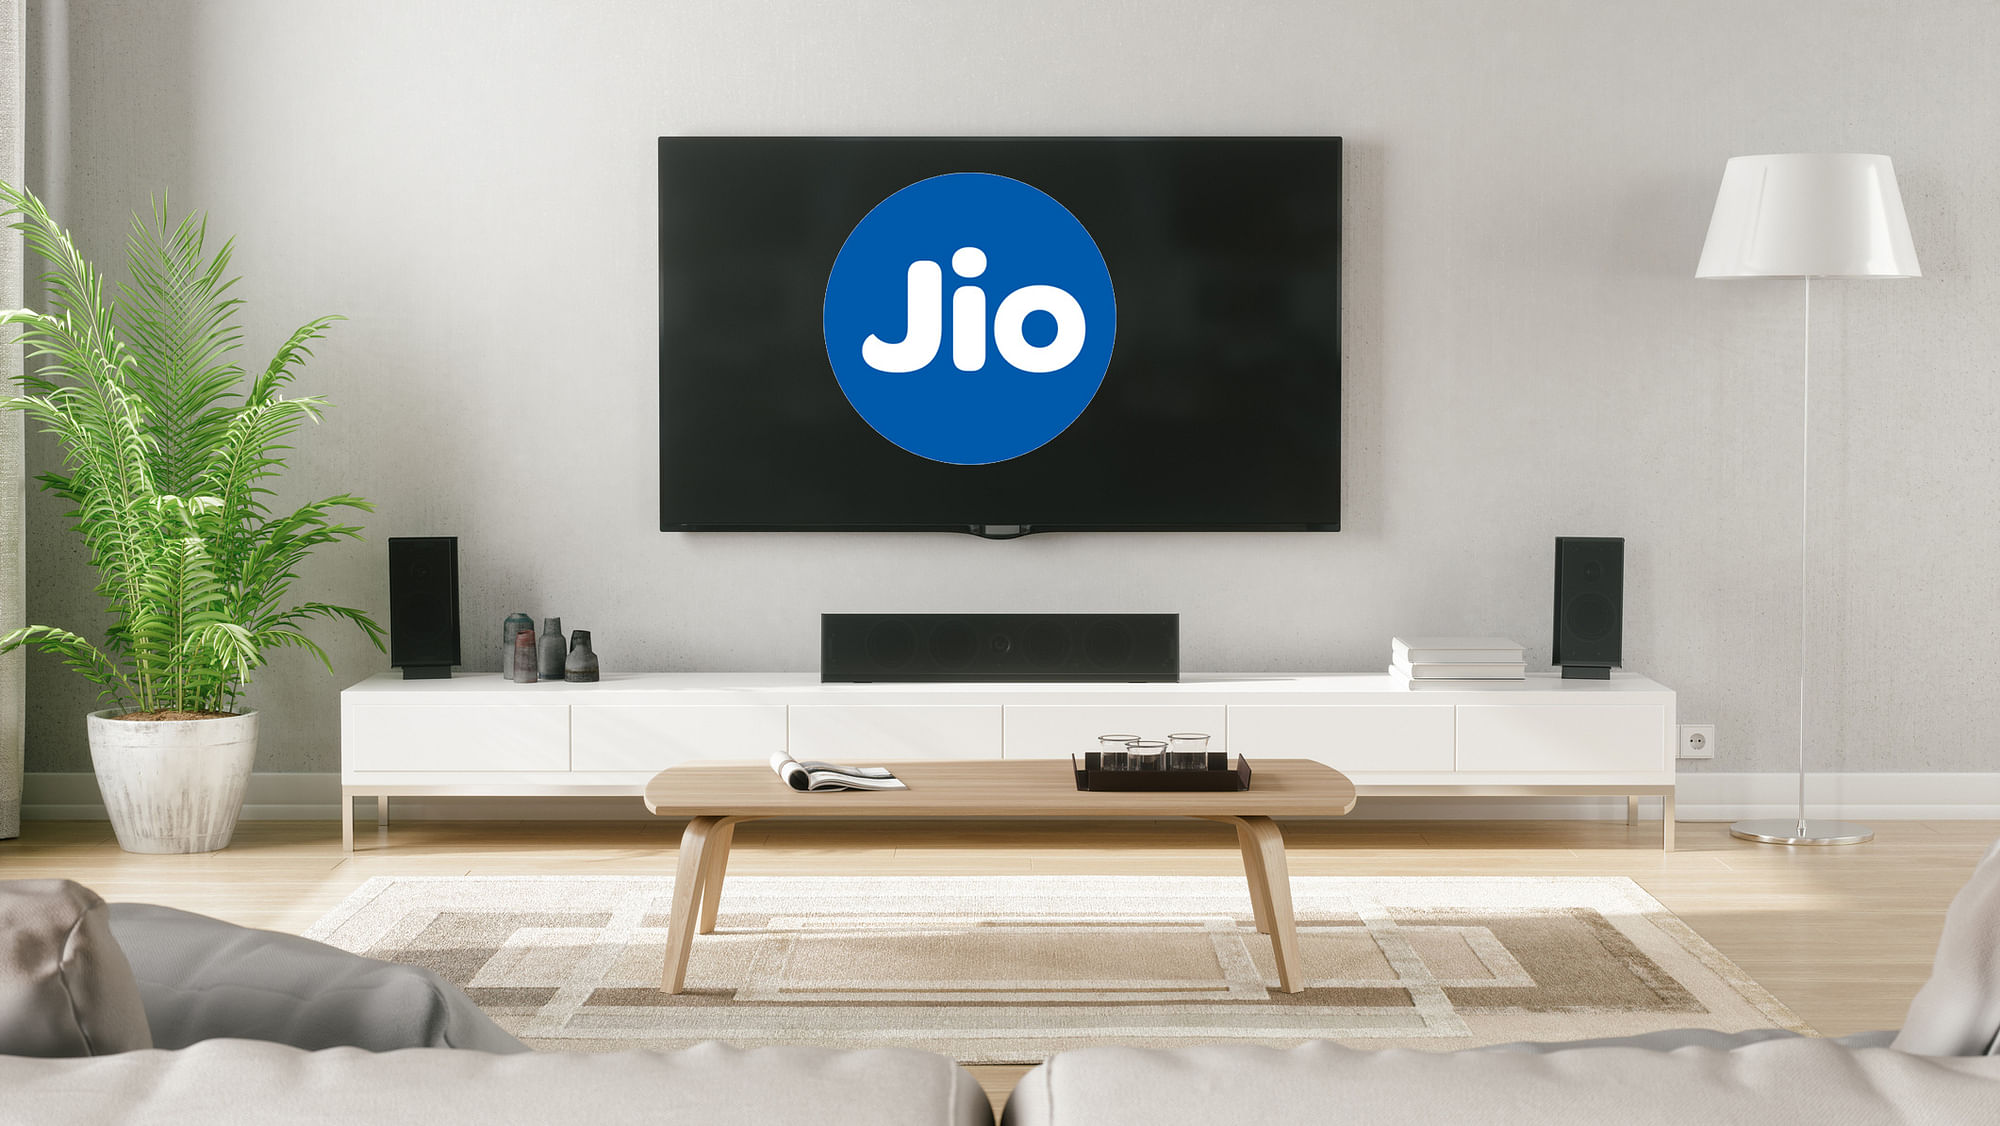 Want to know how you can get a free TV with JioFiber? Read on.